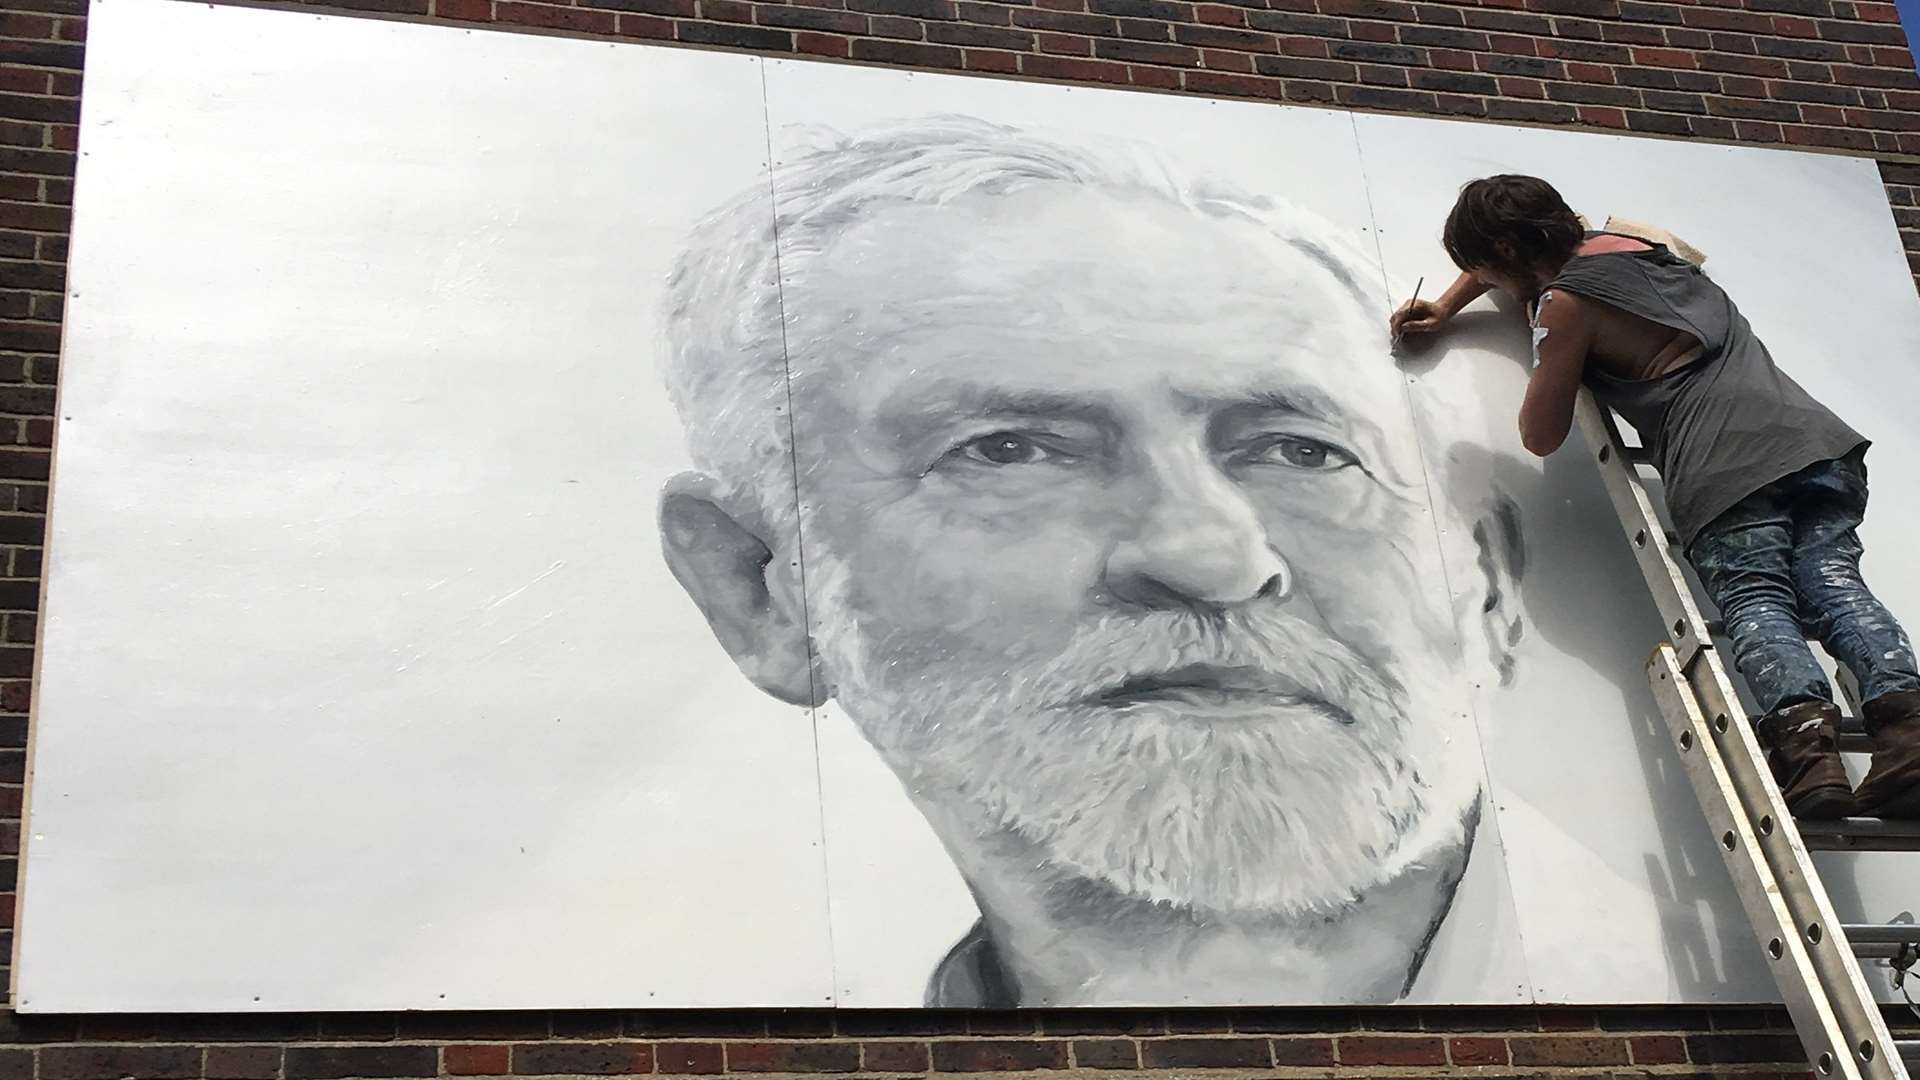 Artist Sam Collins painting a giant mural of Jeremy Corbyn on the side of a London pub